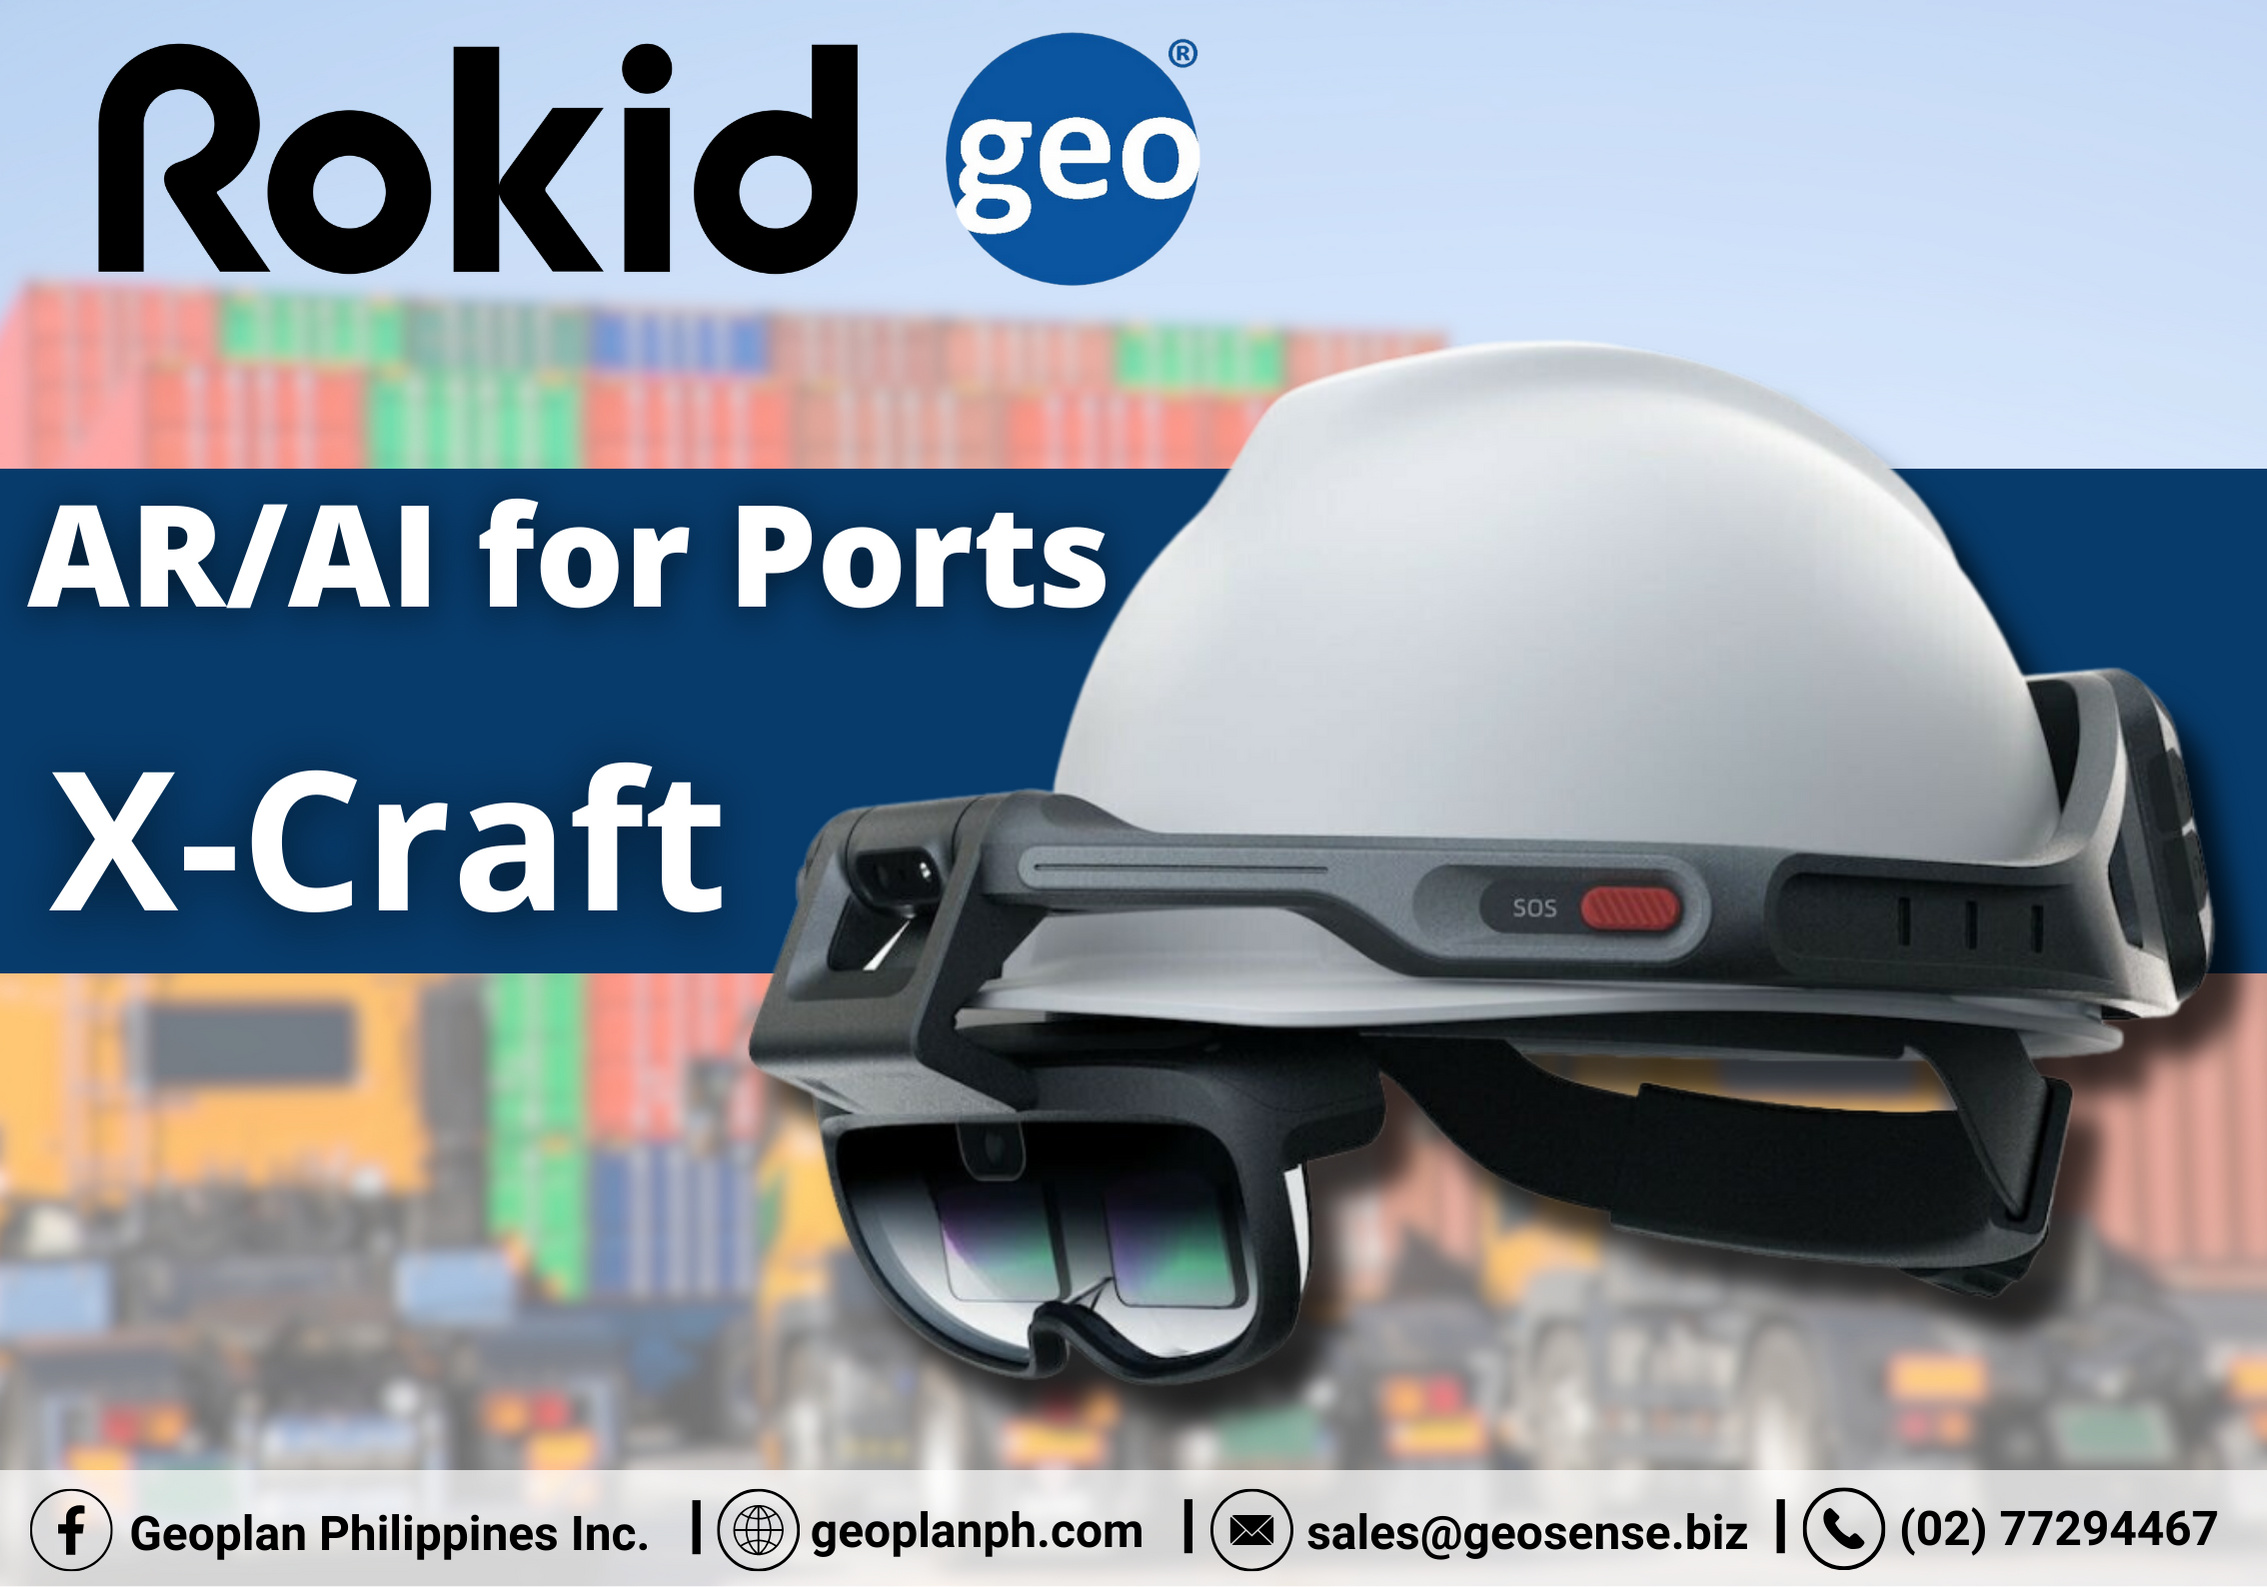 Rokid: The Need of AR+AI in Ports